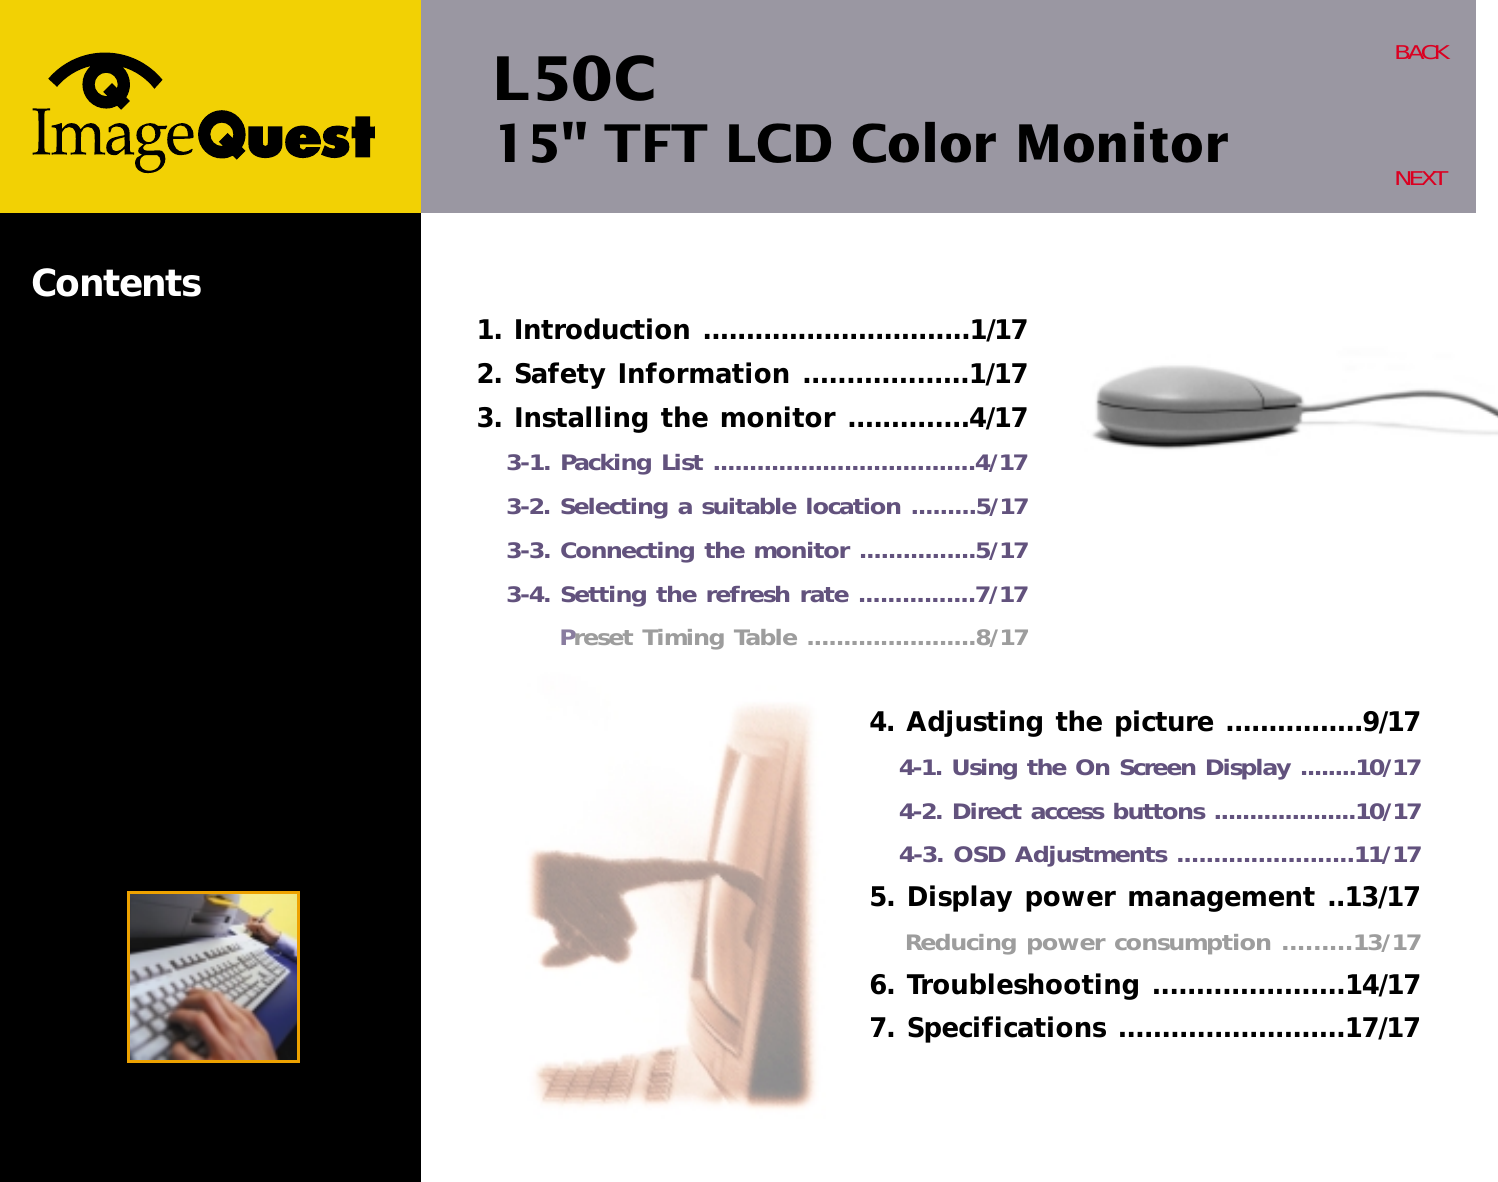 L50C15&quot; TFT LCD Color MonitorBACKNEXTContents4. Adjusting the picture ................9/174-1. Using the On Screen Display ........10/174-2. Direct access buttons ....................10/174-3. OSD Adjustments ........................11/175. Display power management ..13/17Reducing power consumption .........13/176. Troubleshooting ......................14/177. Specifications ..........................17/171. Introduction ...............................1/172. Safety Information ...................1/173. Installing the monitor ..............4/173-1. Packing List ....................................4/173-2. Selecting a suitable location .........5/173-3. Connecting the monitor ................5/173-4. Setting the refresh rate ................7/17Preset Timing Table .......................8/17